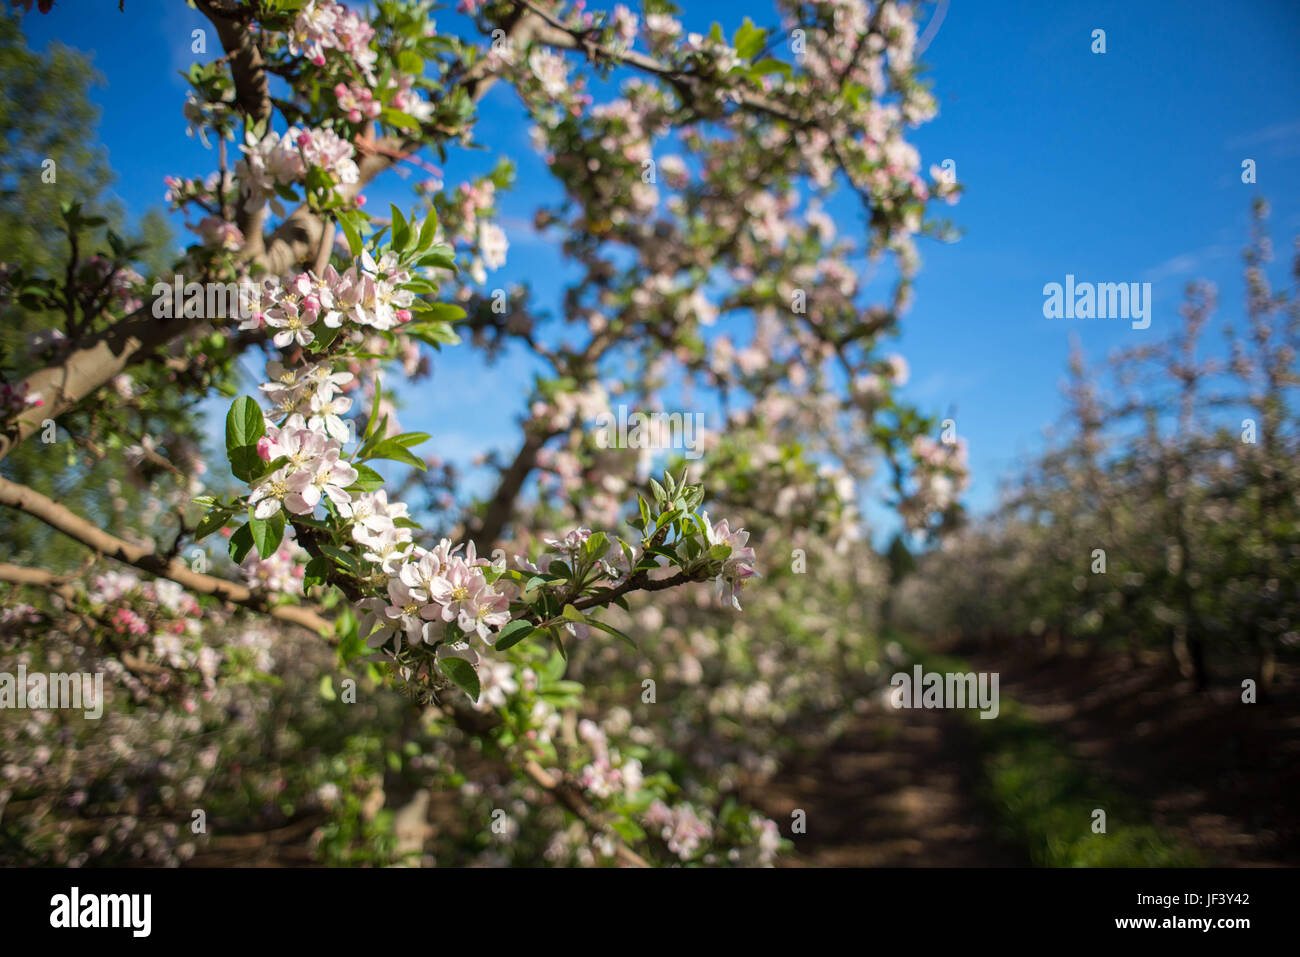 Blossoms on a pear tree Stock Photo